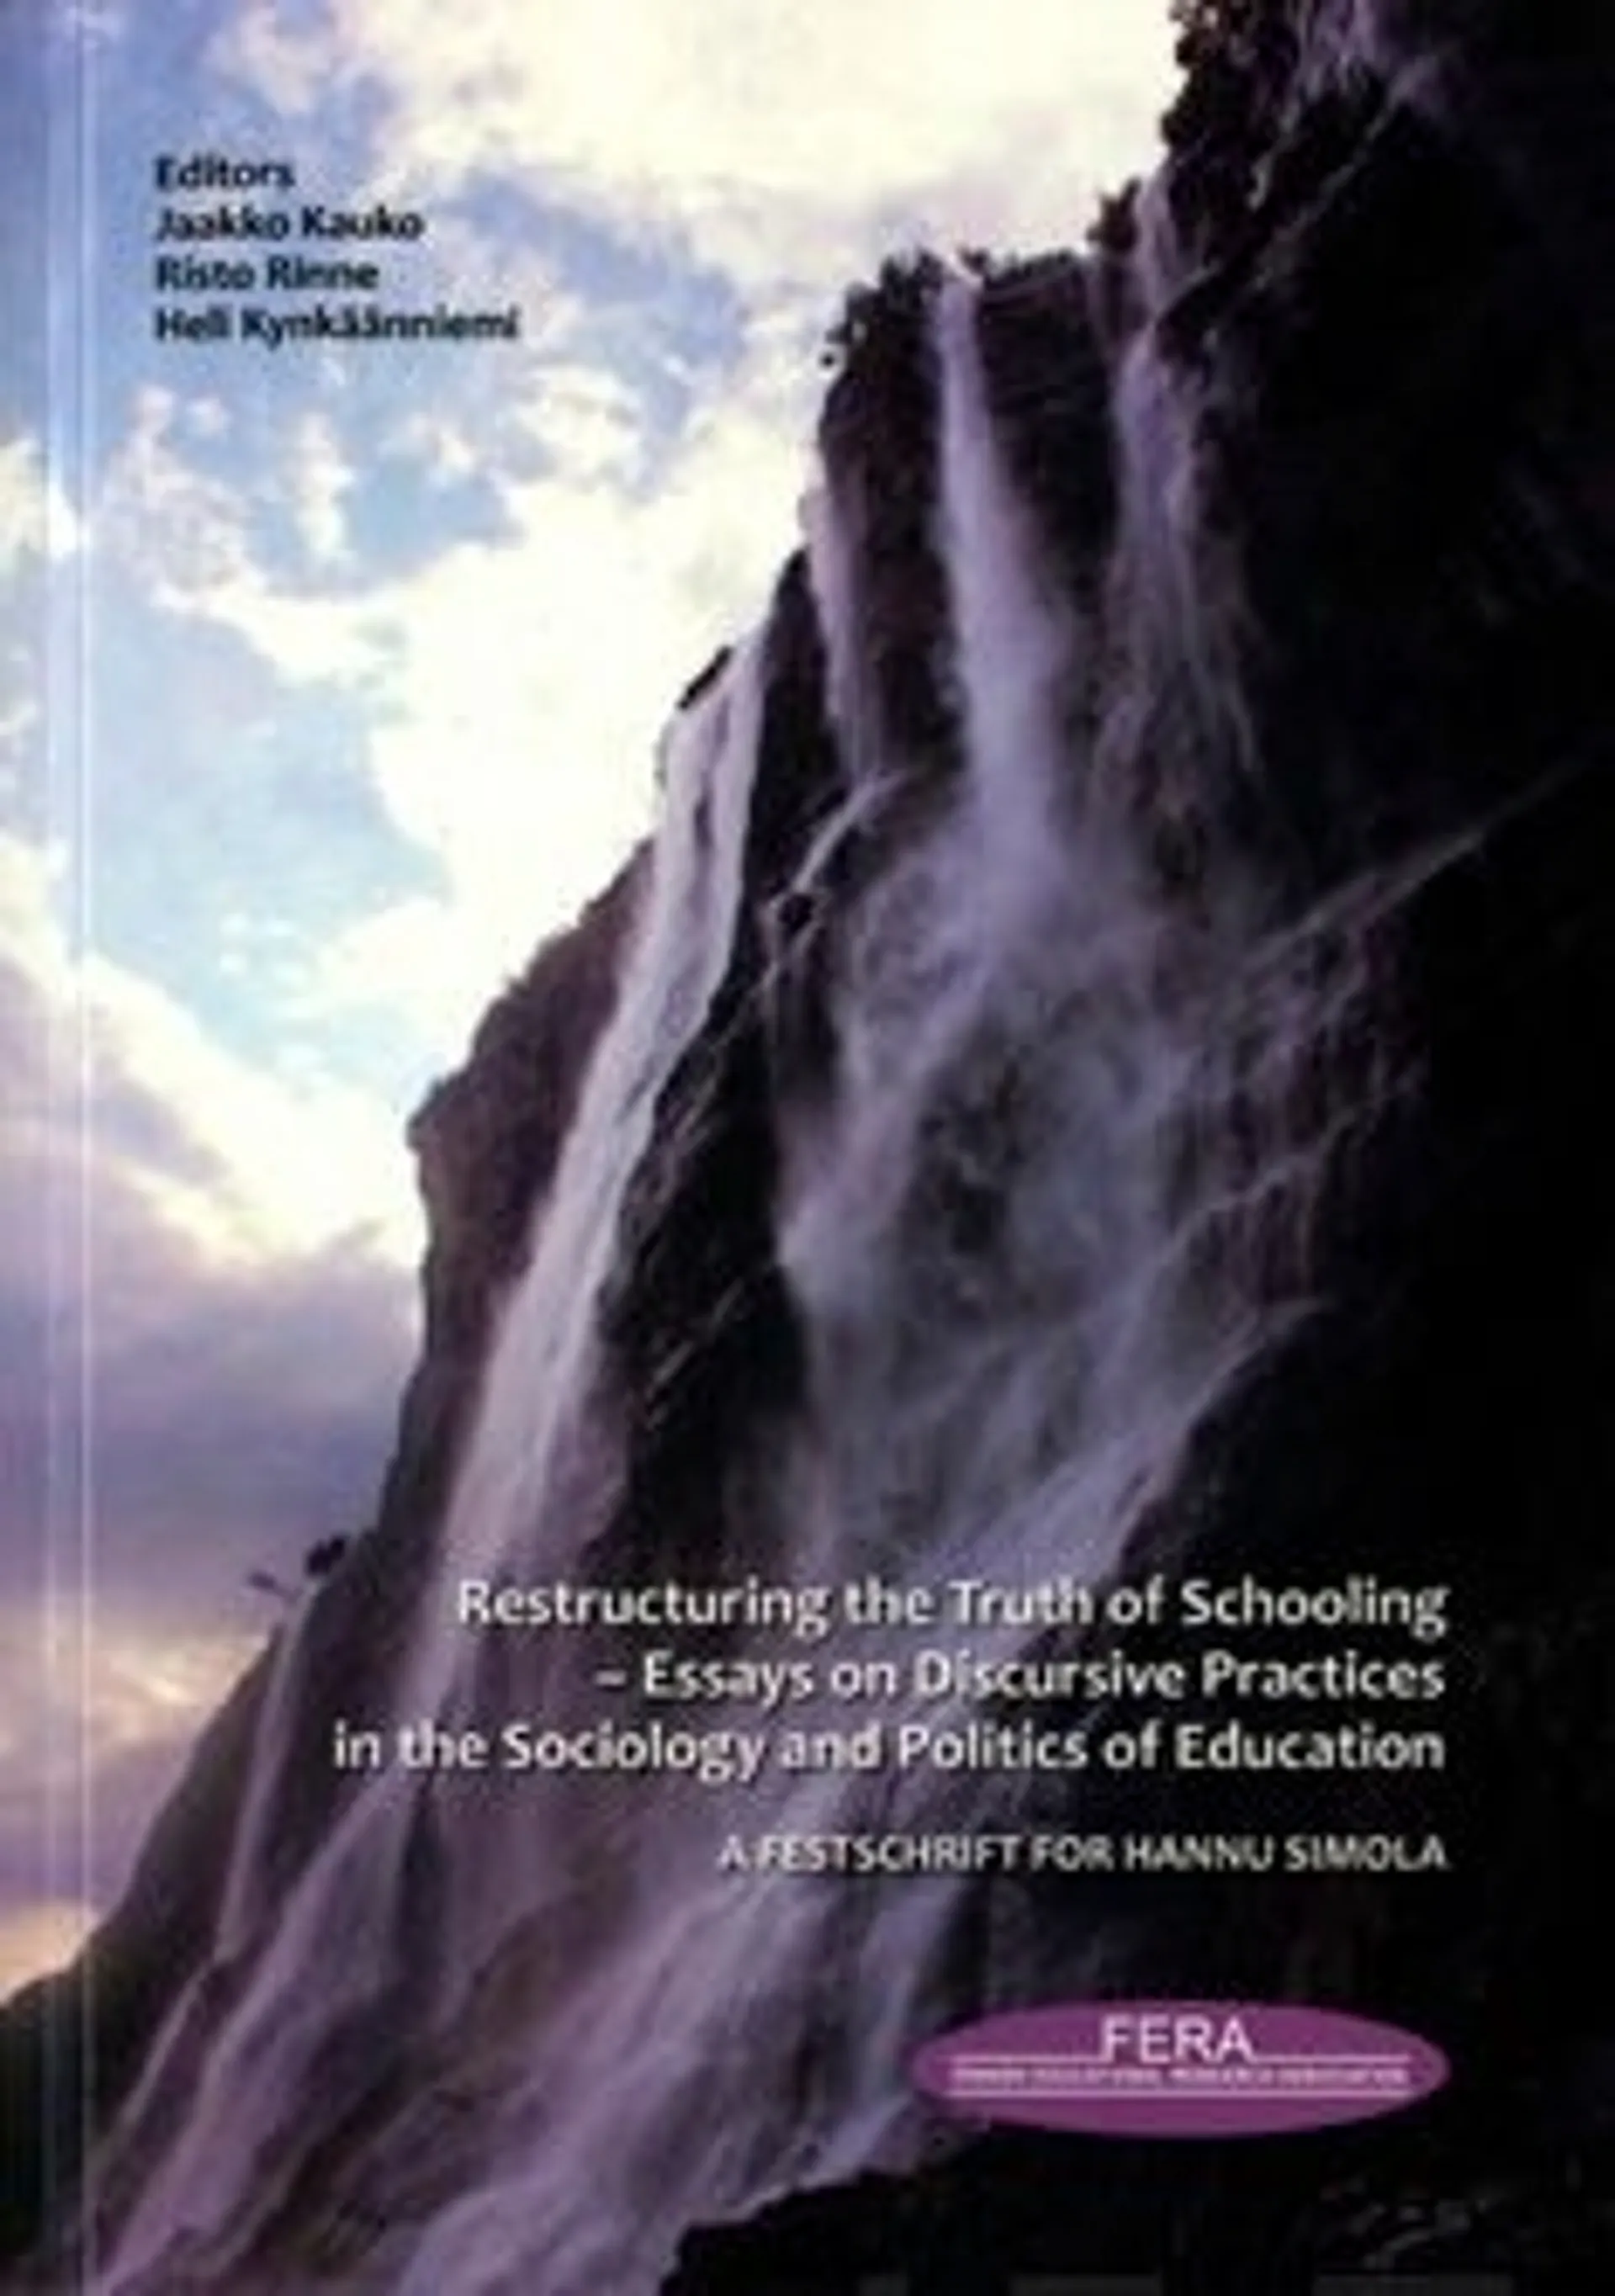 Restructuring the Thruth of Schooling - essays on discursive Practices in theSosiology and Politics of Education : afestschrift for Hannu Simola